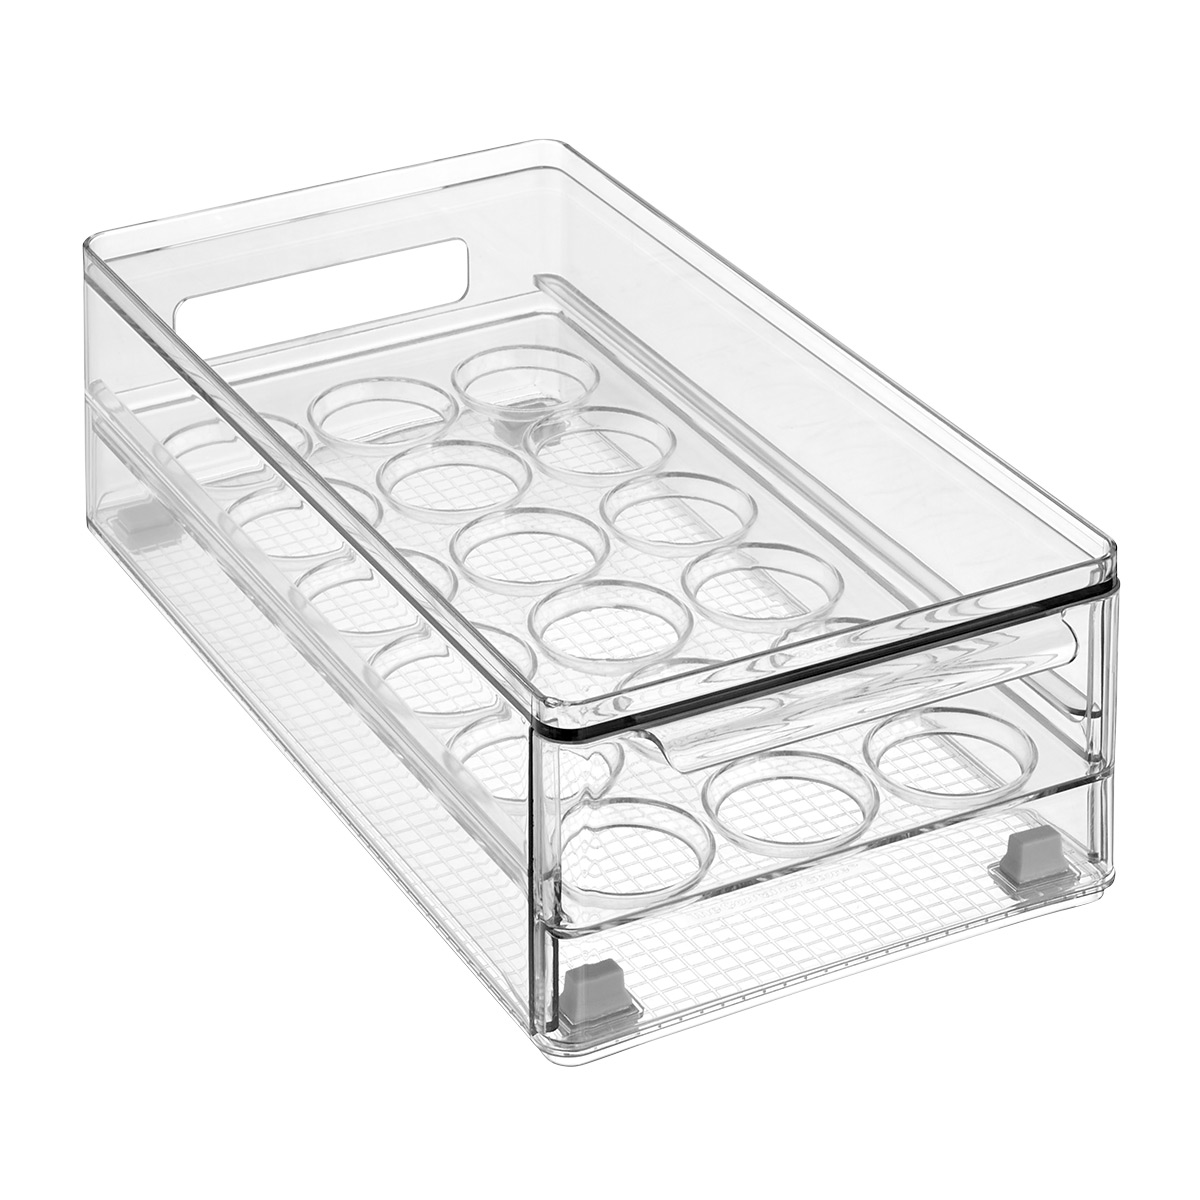 https://www.containerstore.com/catalogimages/470382/10090583-egg-drawer-clip.jpg